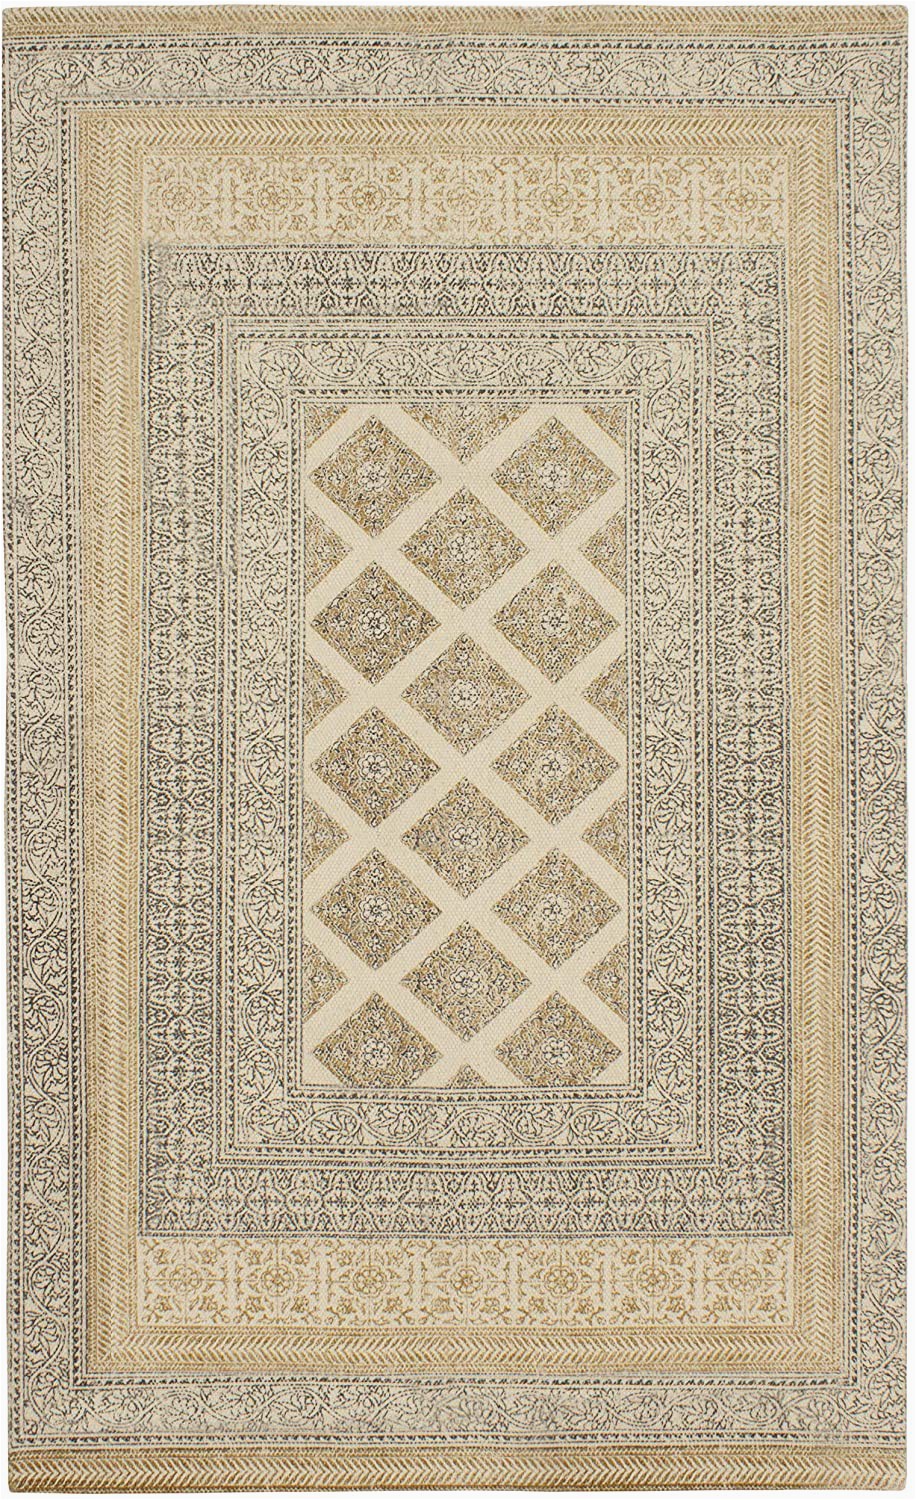 48 X 60 area Rug French Connection Bryn Stonewash Printed Cotton Accent Rug 48 In X 72 In Natural